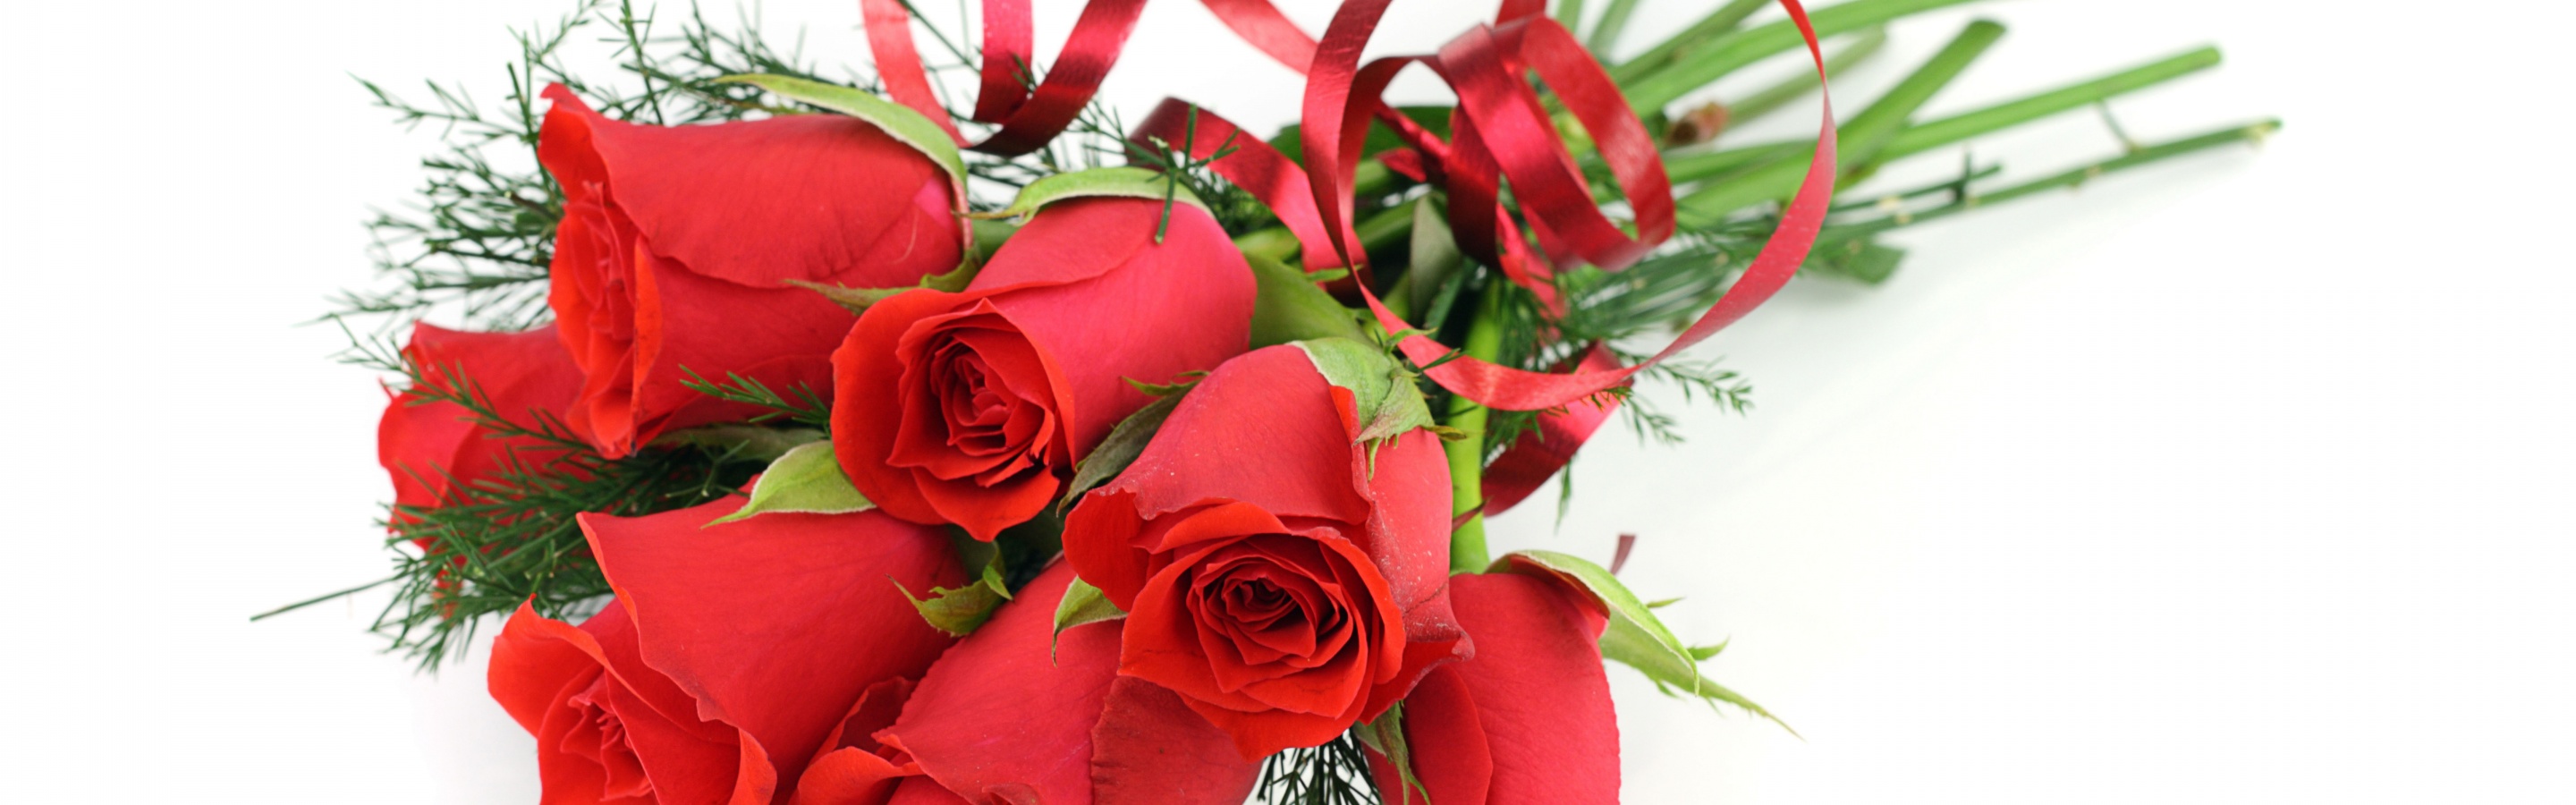 Red Roses For March 8 Womens Day